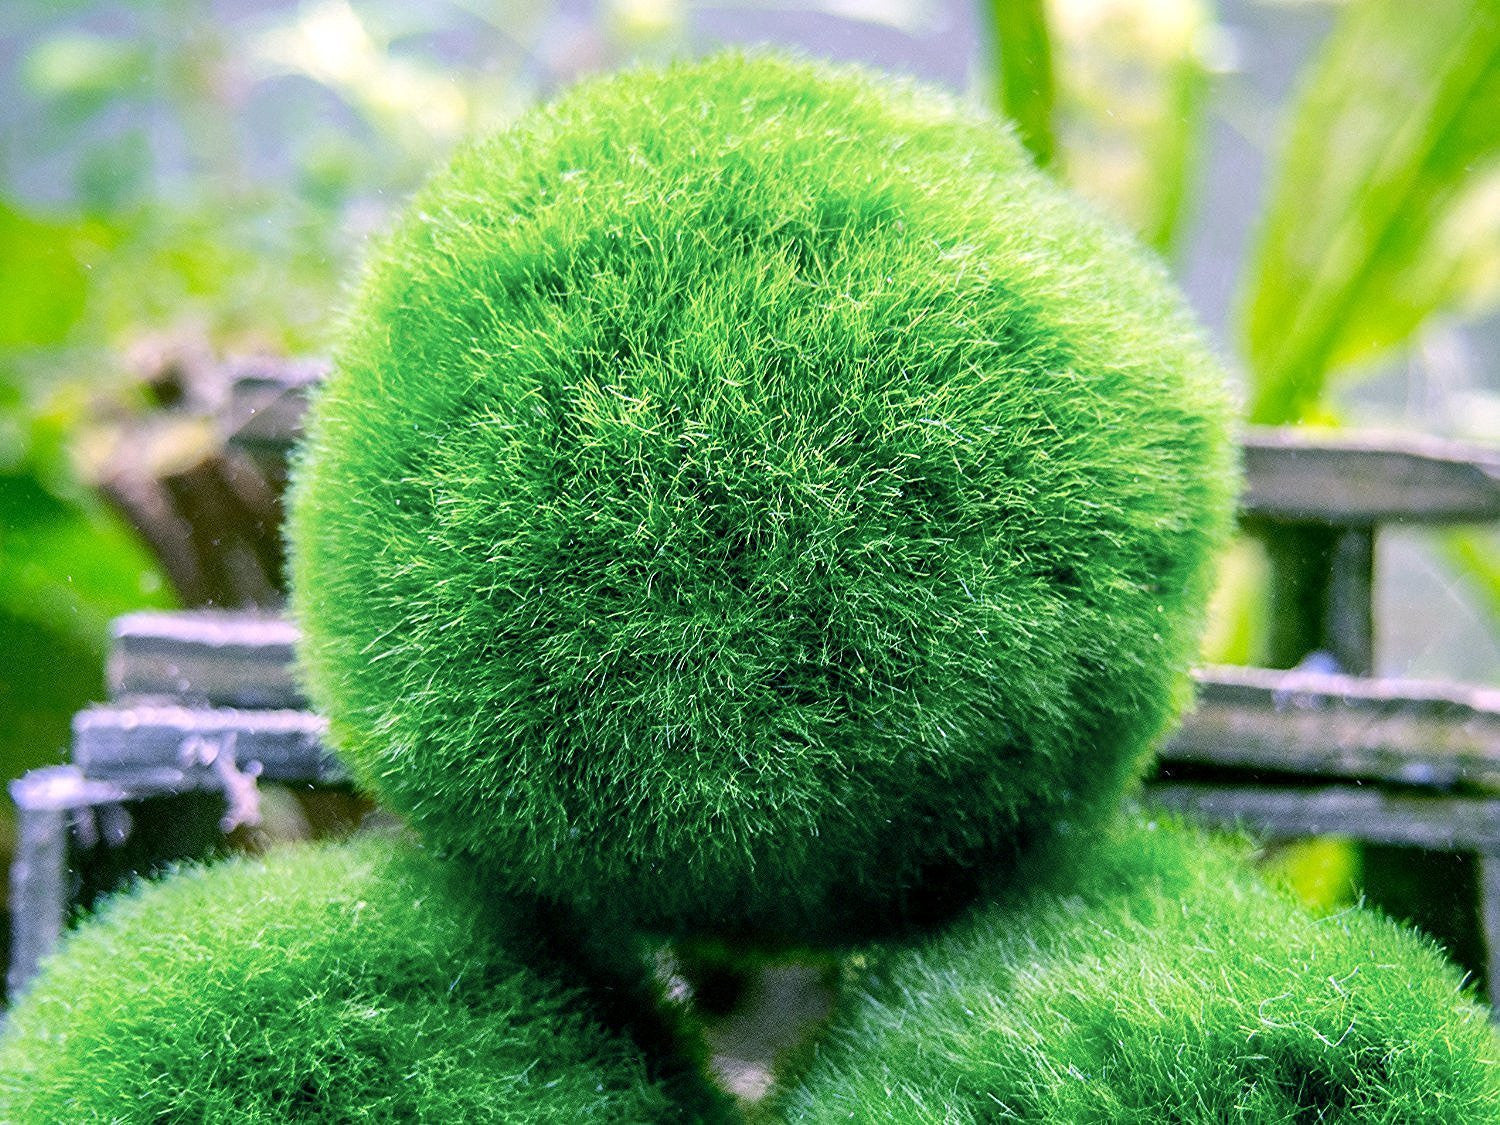 The Beginner's Guide to Caring for Marimo Moss Balls – Aquarium Plants  Factory